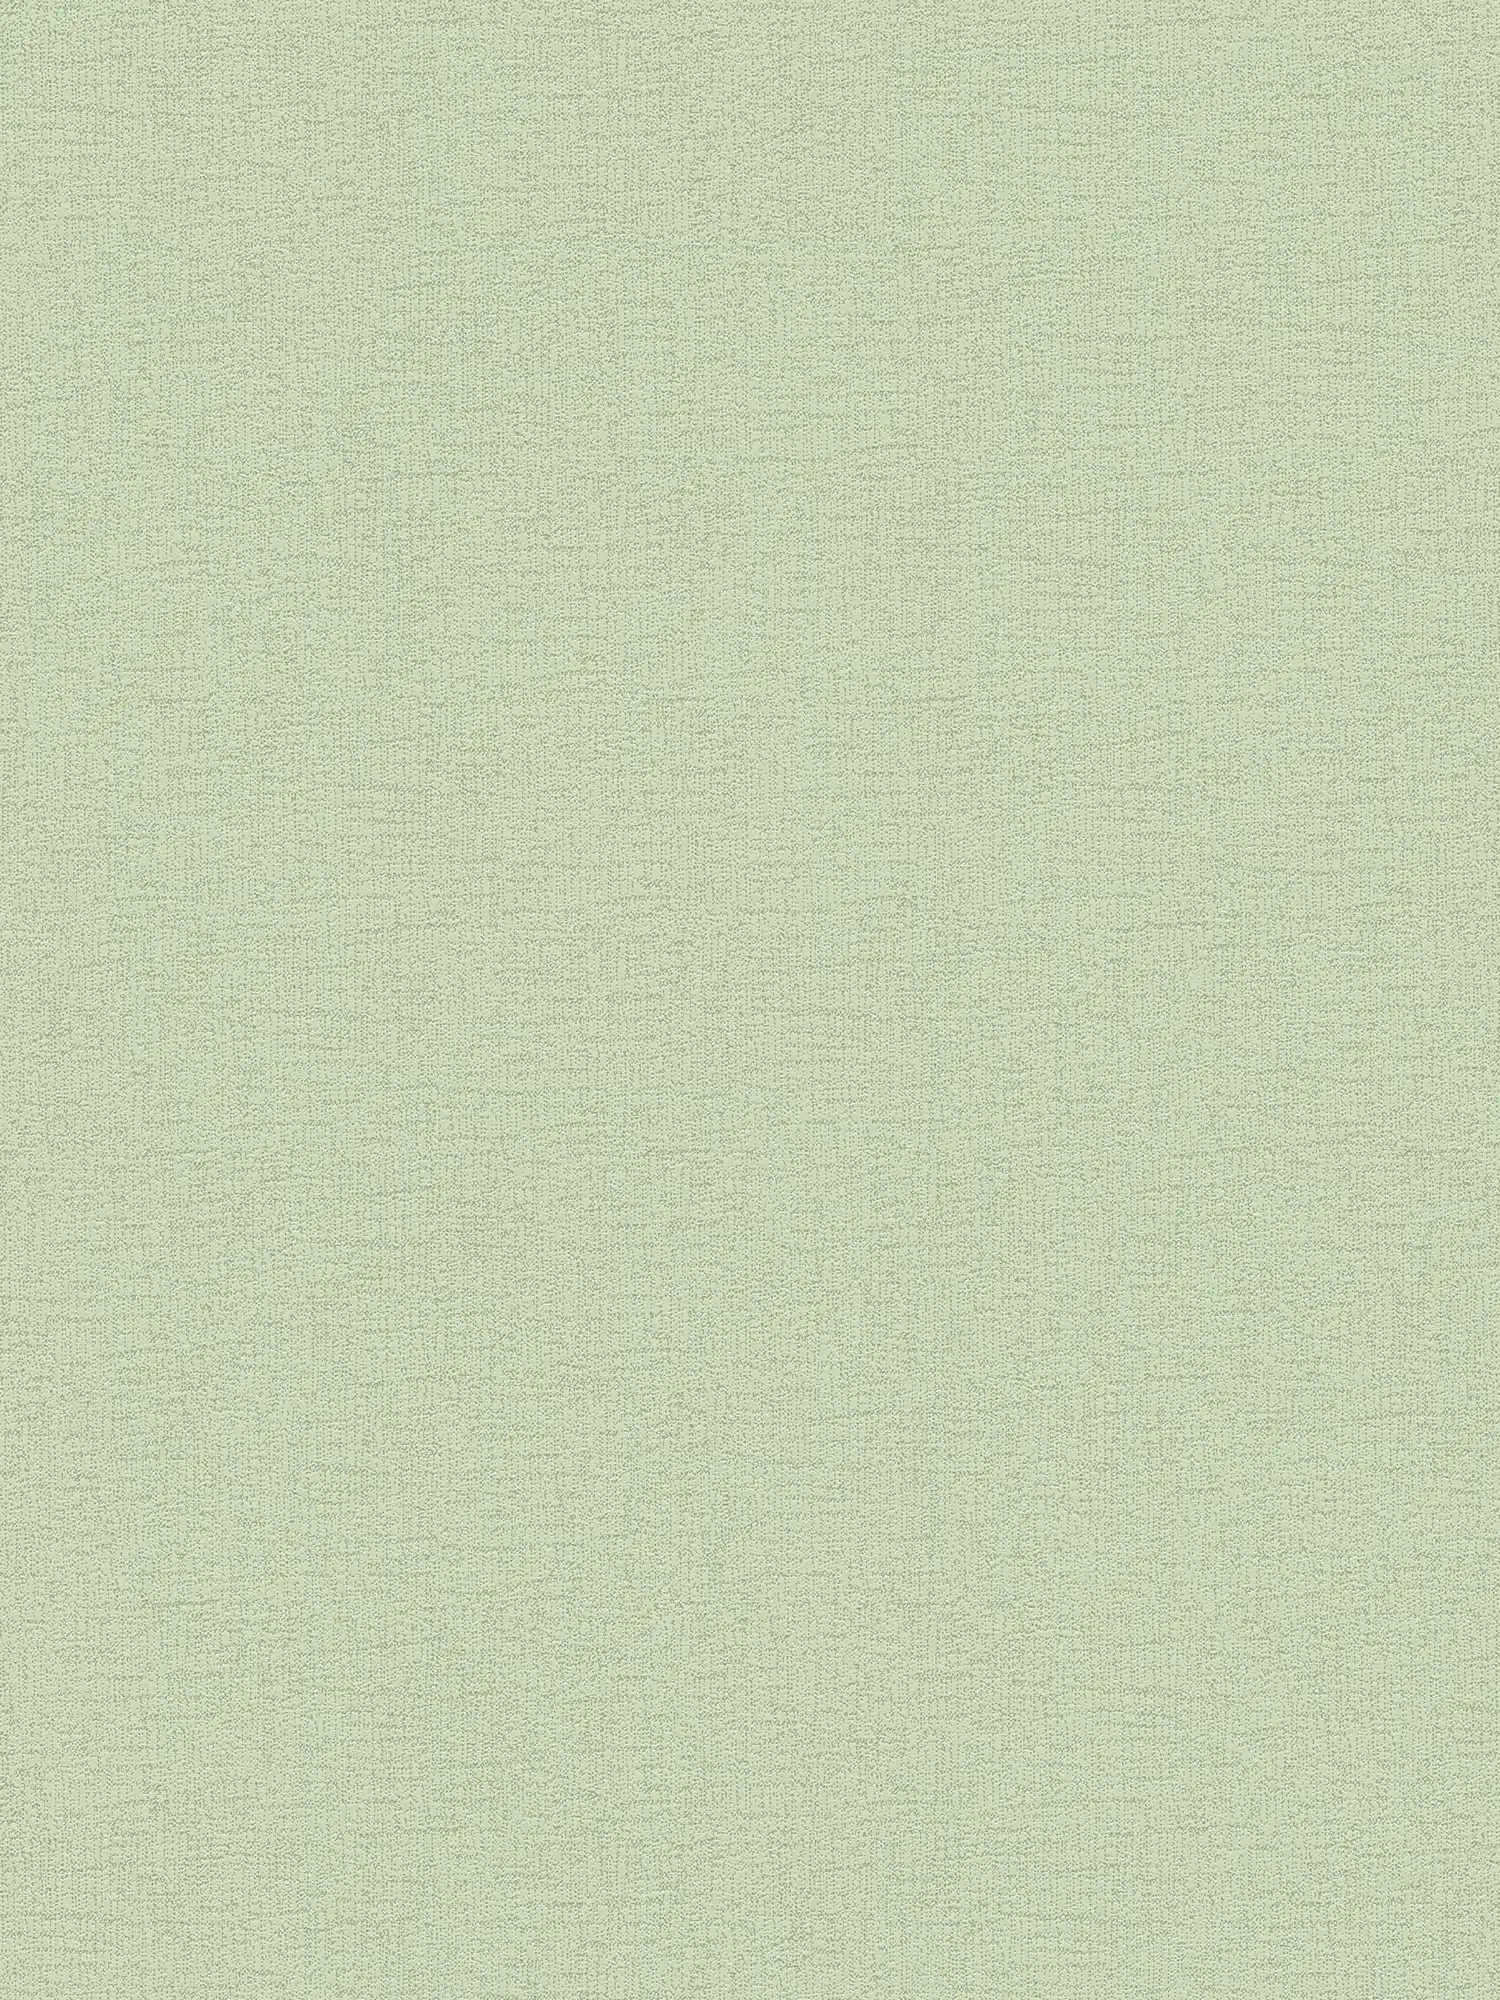 Non-woven wallpaper with fine linen structure - green
